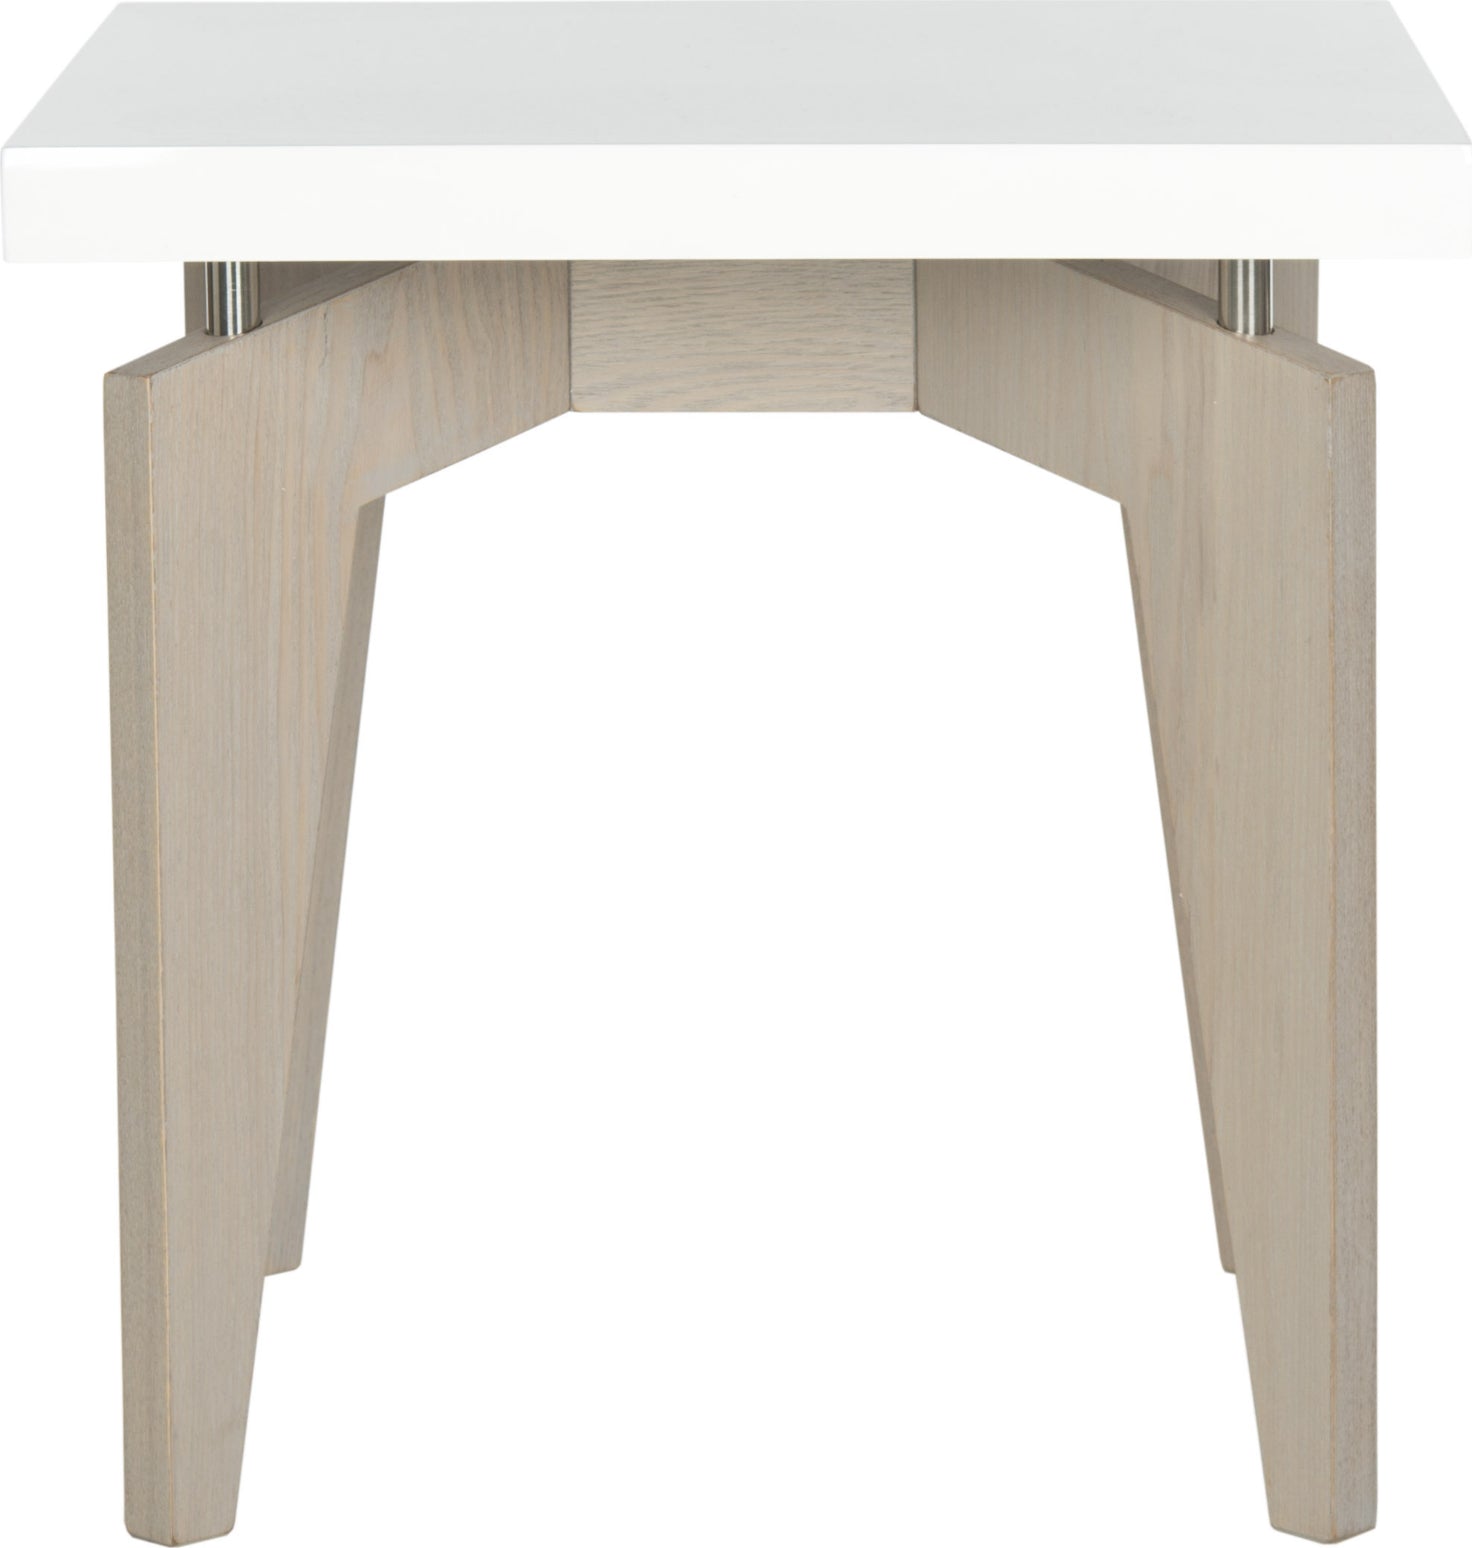 Safavieh Josef Retro Lacquer Floating Top End Table White and Grey Furniture main image